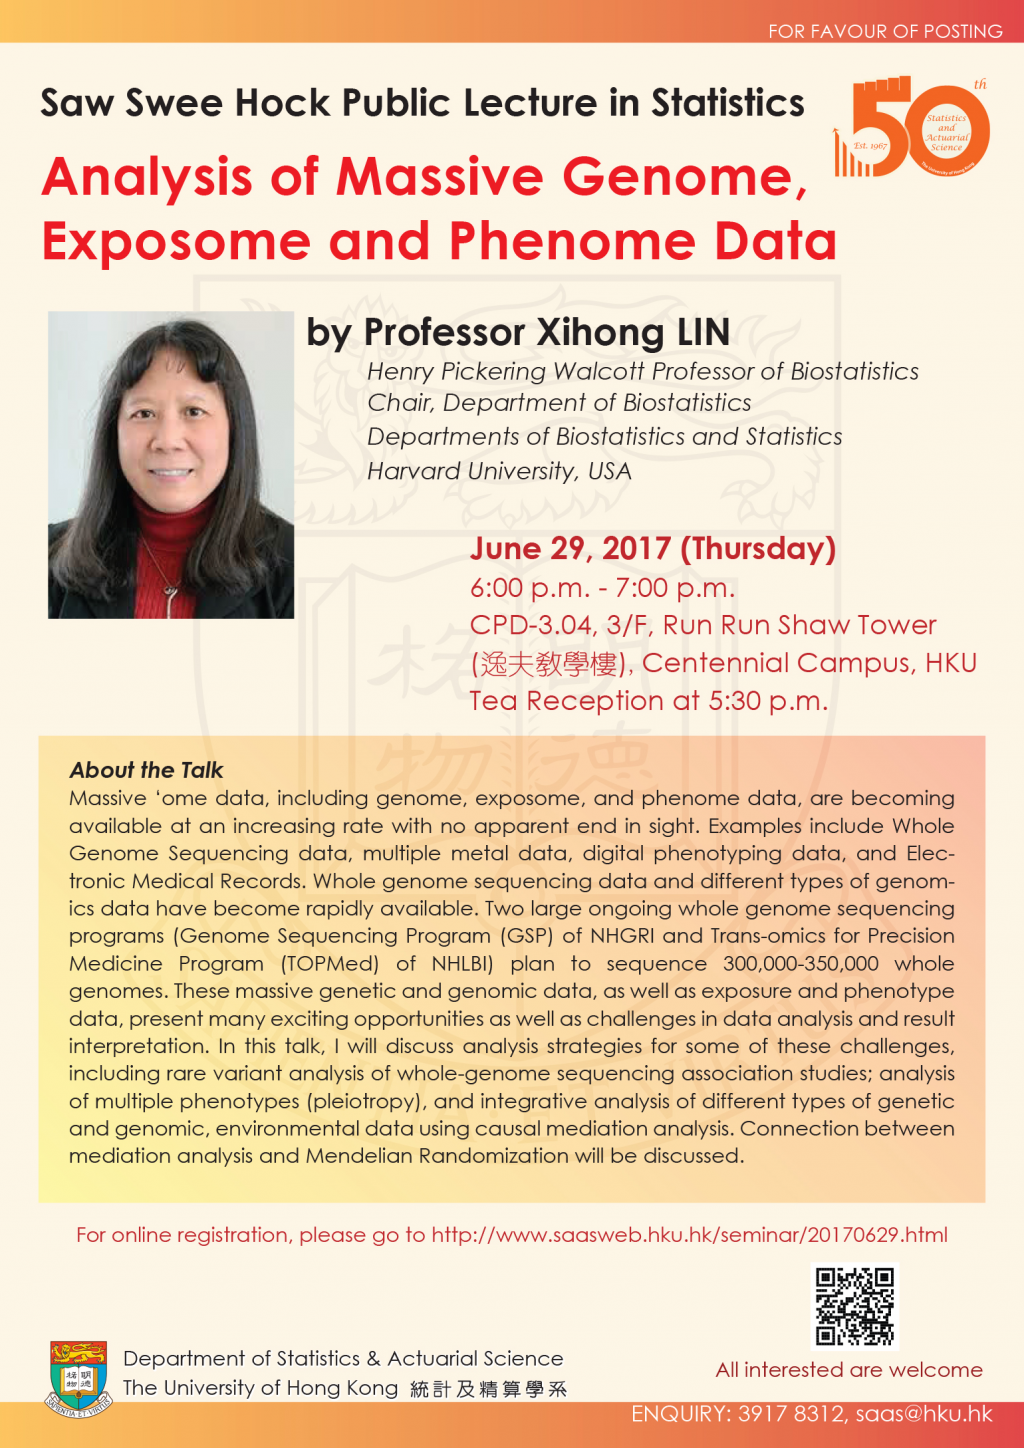 Saw Swee Hock Public Lecture in Statistics on 'Analysis of Massive Genome, Exposome and Phenome Data' by Professor Xihong LIN